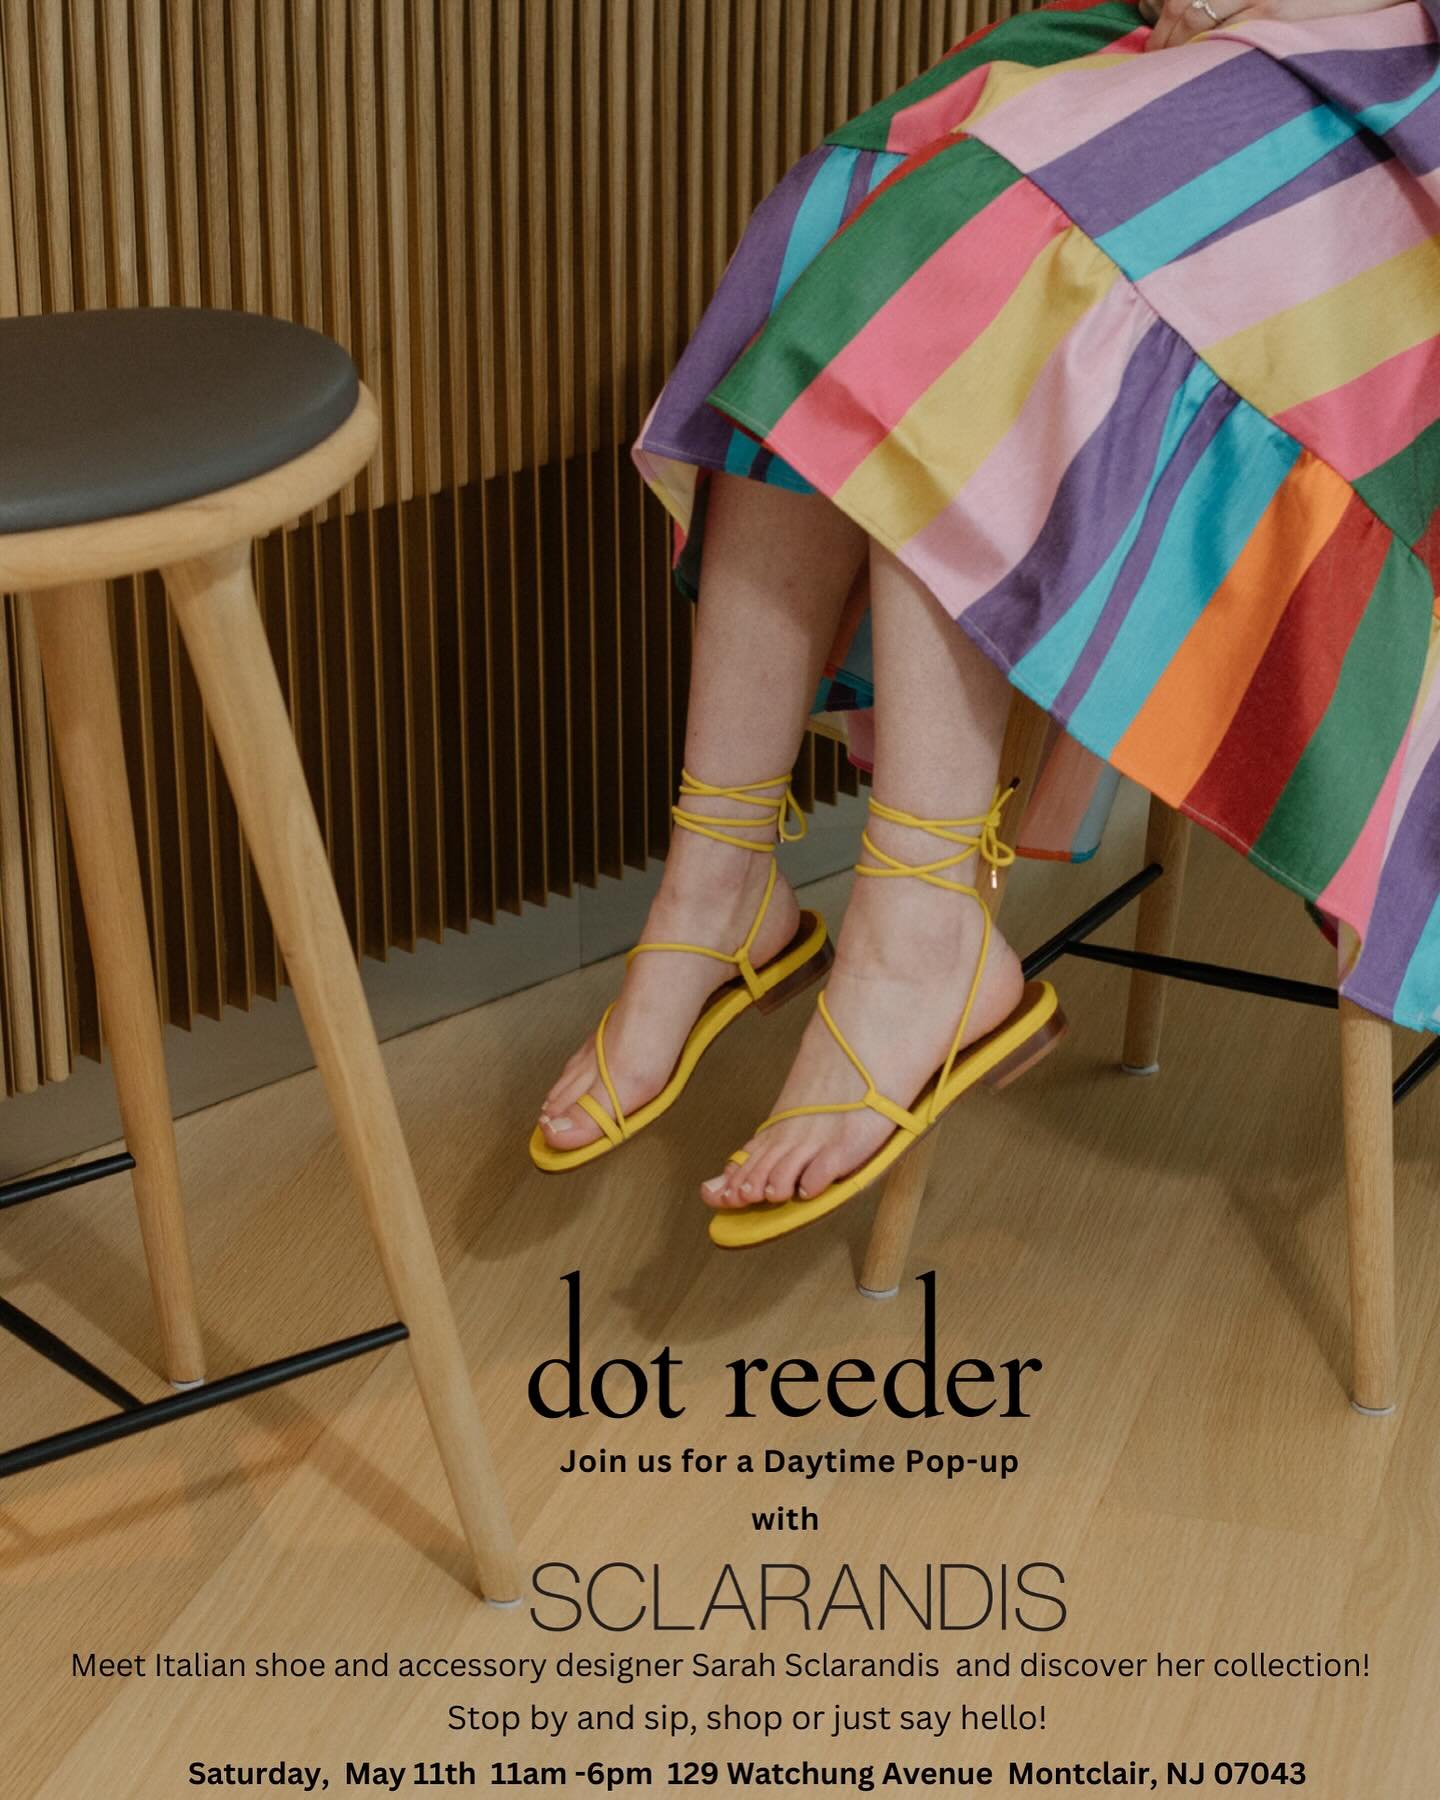 Please join us this Saturday and meet Designer Sarah Sclarandis shoe designer of @sclarandis at our Montclair location from 11am-6pm, see you there!